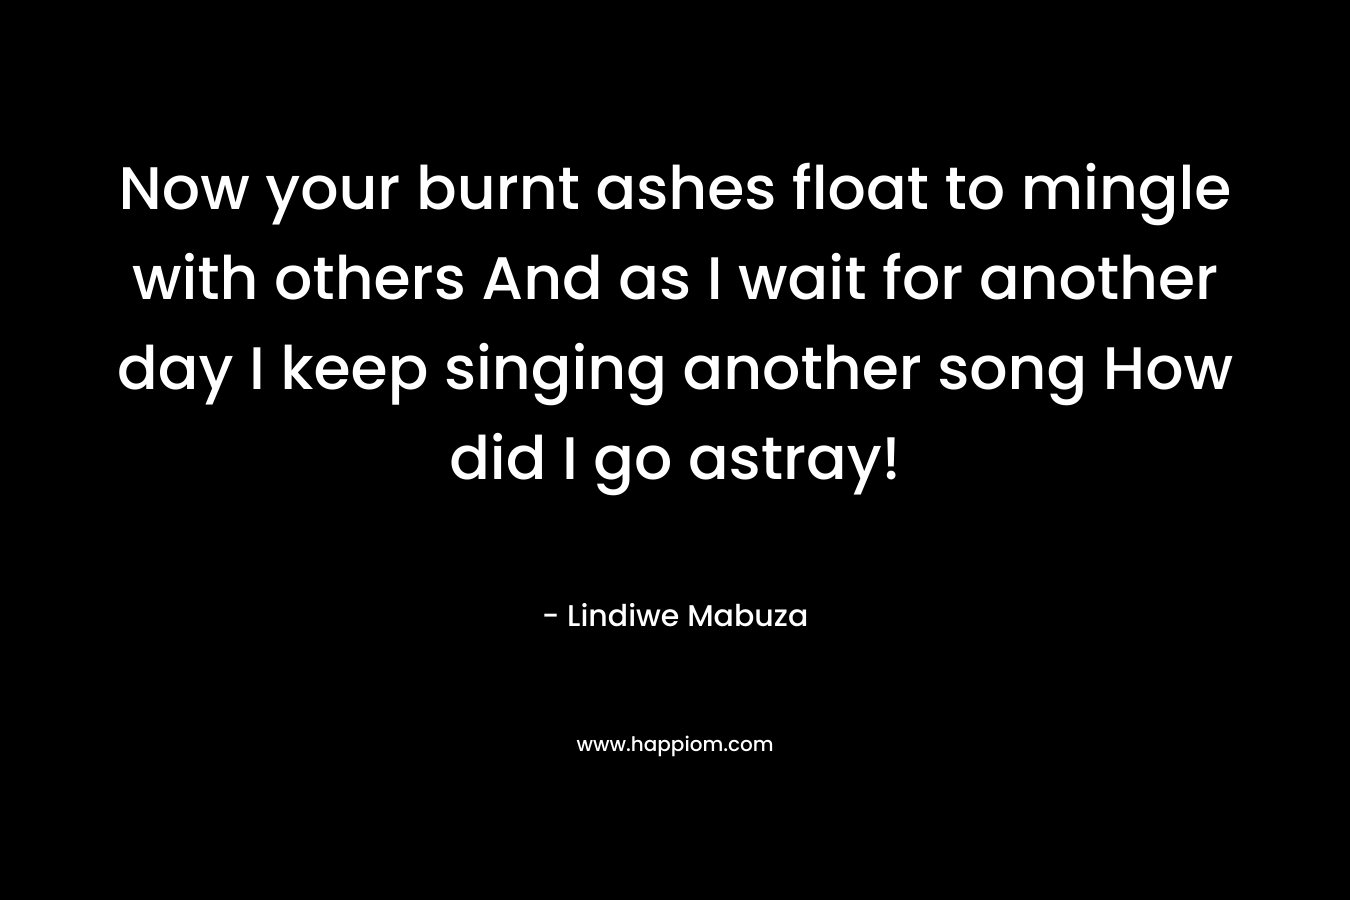 Now your burnt ashes float to mingle with others And as I wait for another day I keep singing another song How did I go astray!